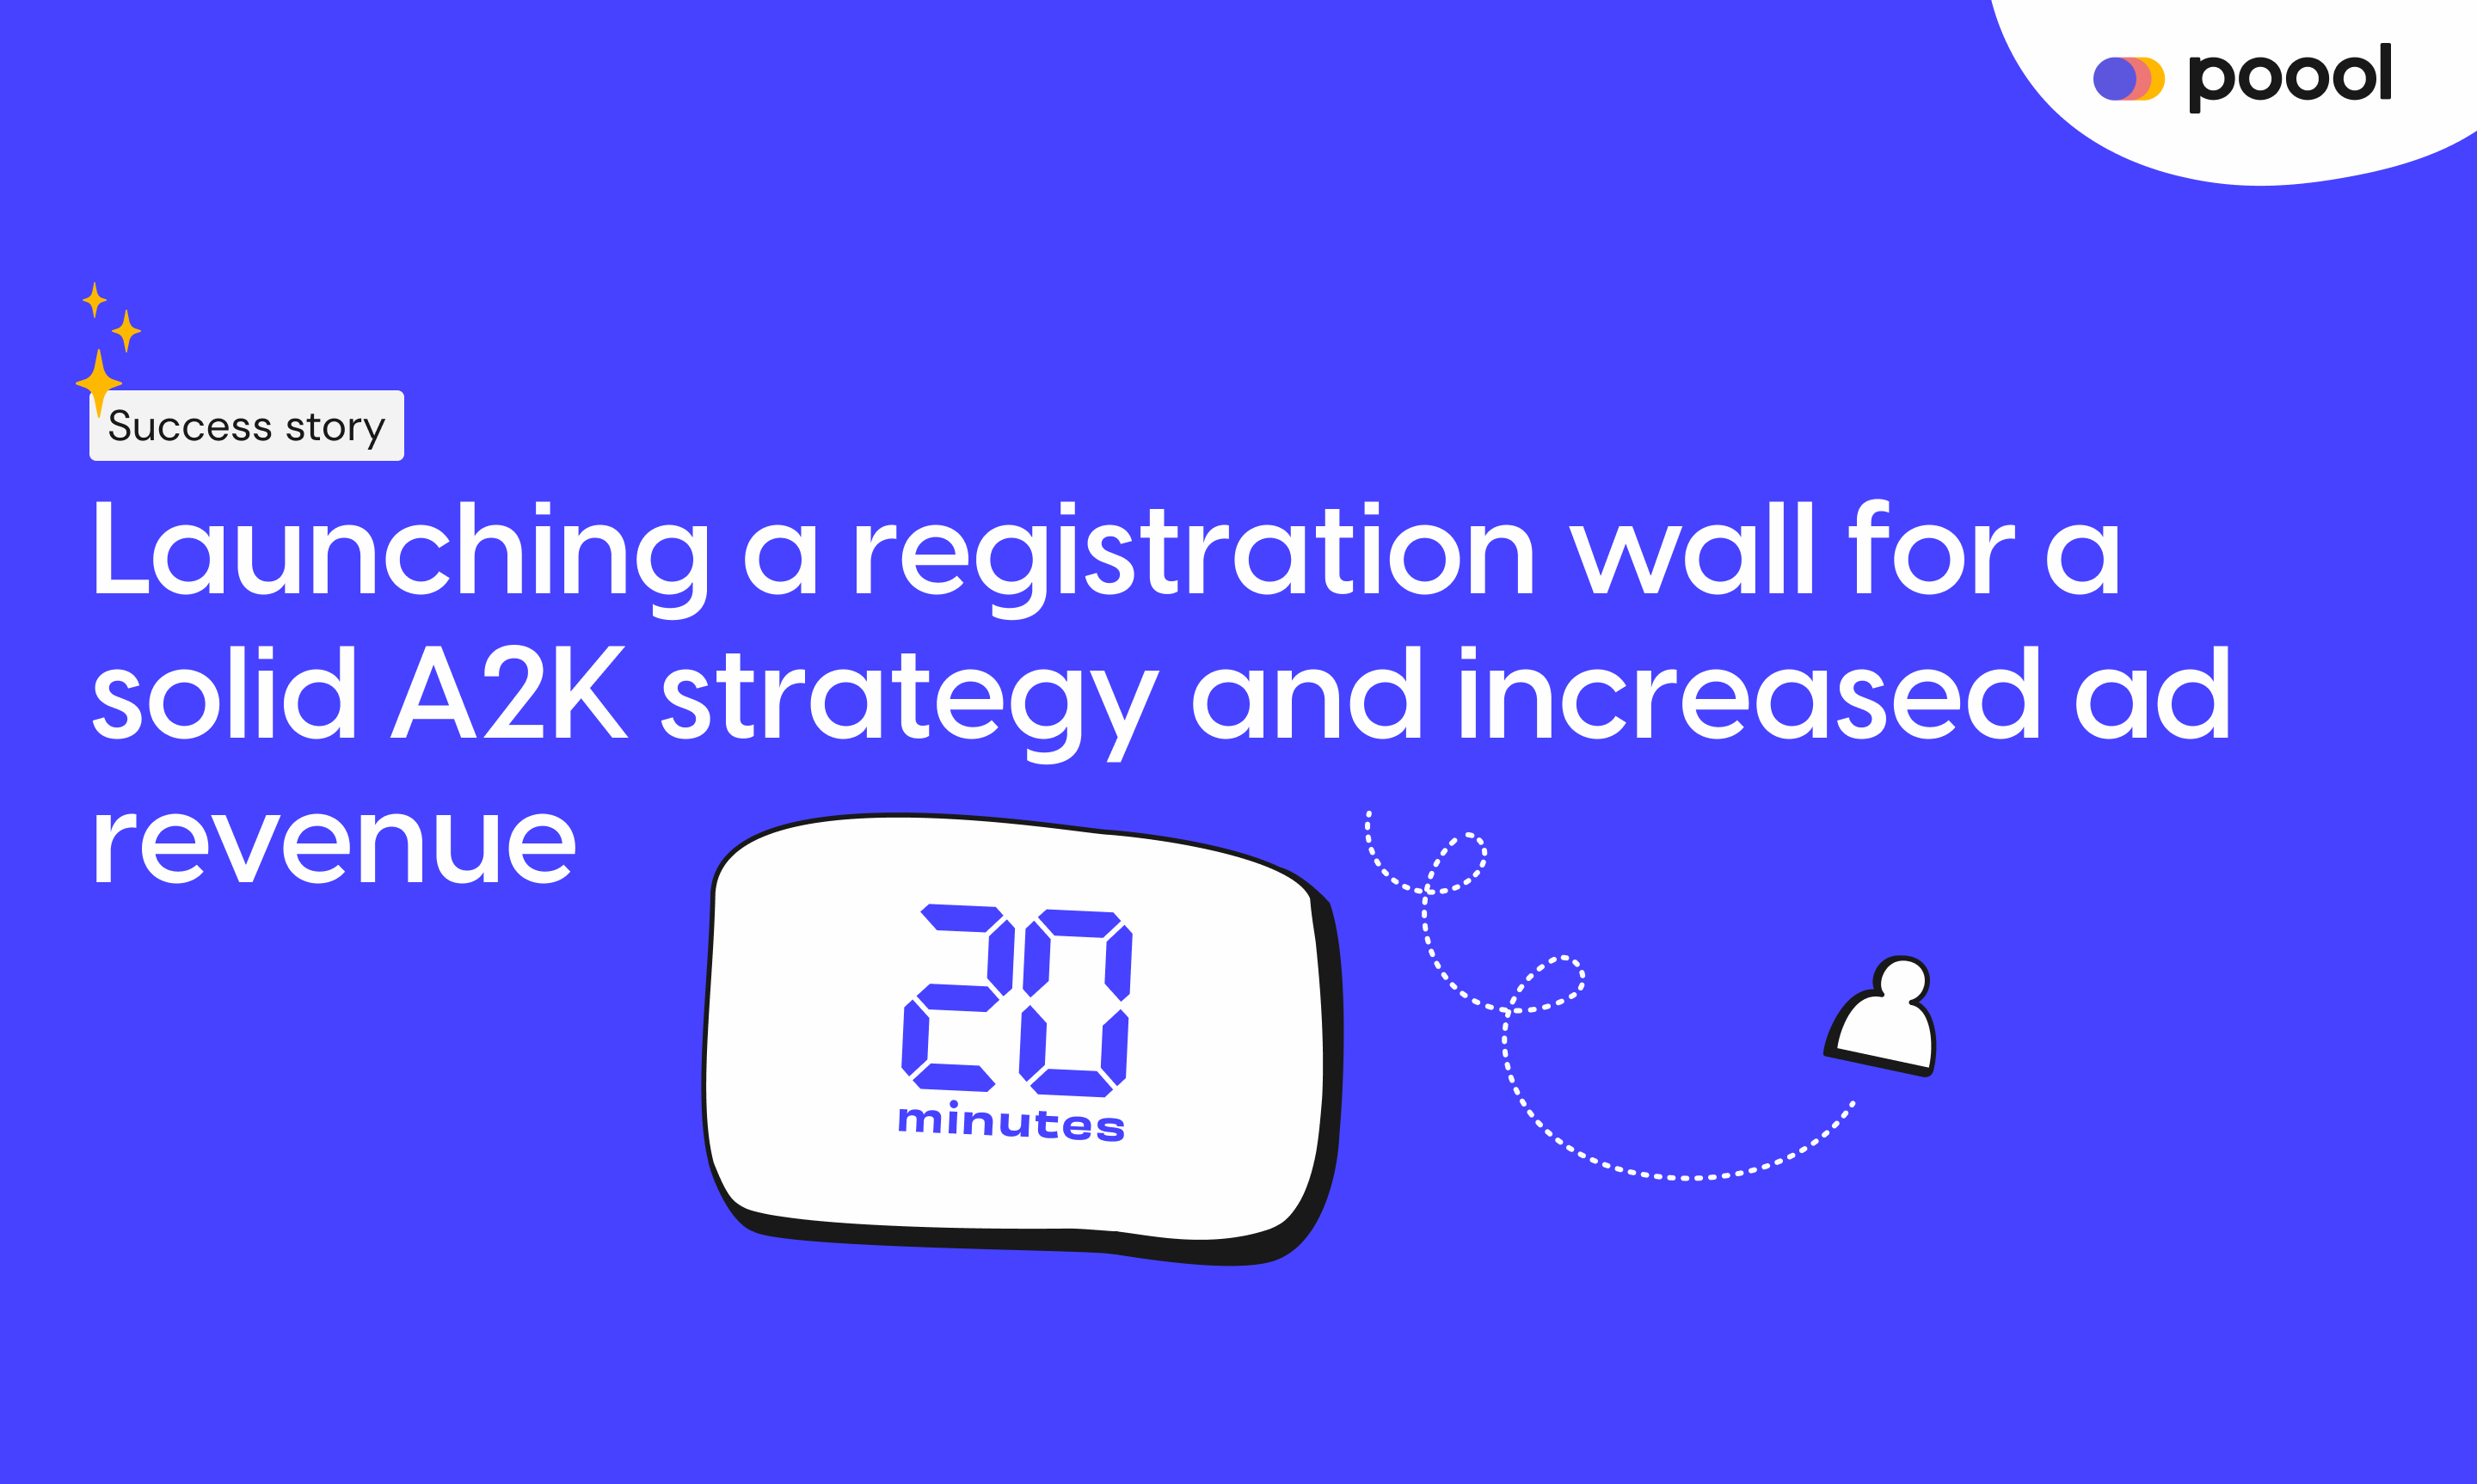 20 Minutes: launching a registration wall for a solid A2K strategy and increased ad revenue